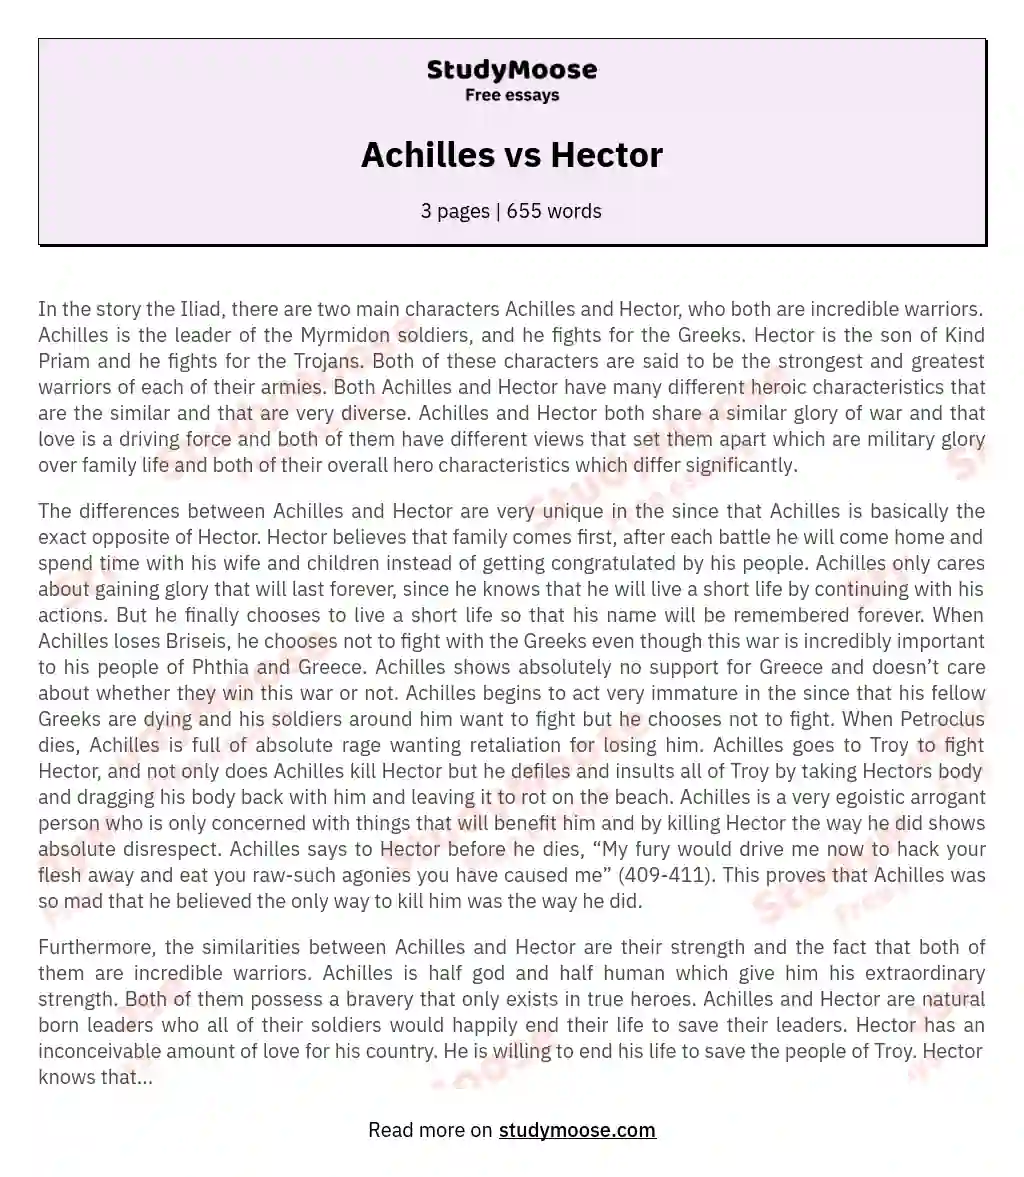 Achilles and Hector: A Study in Heroism and Leadership essay